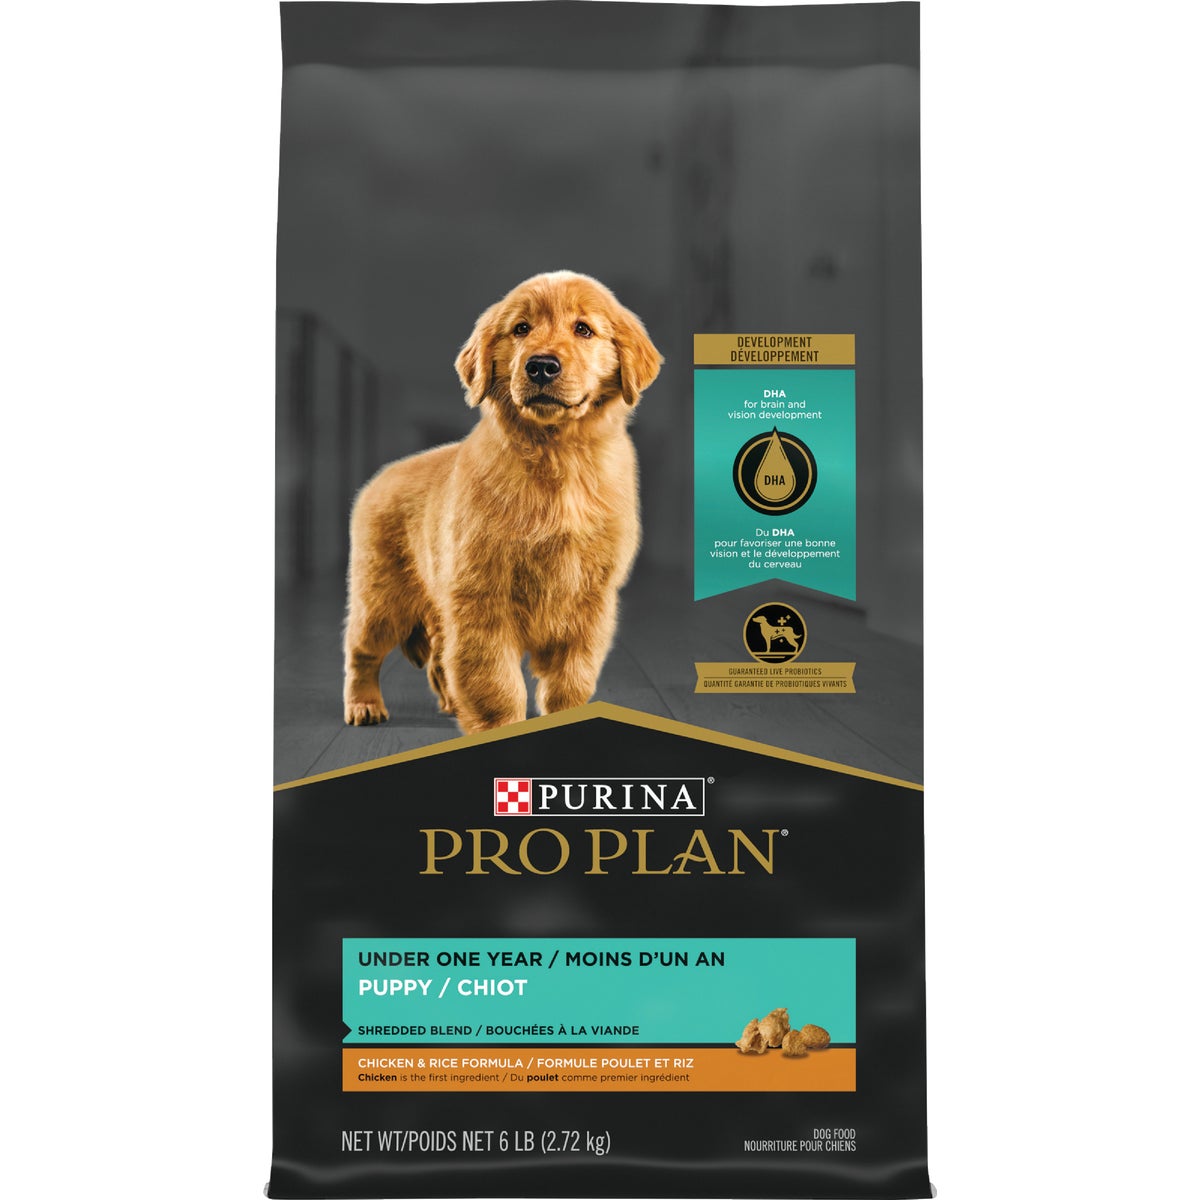 Purina Pro Plan Shredded Blend 6 Lb. Chicken & Rice Flavor Dry Puppy Food